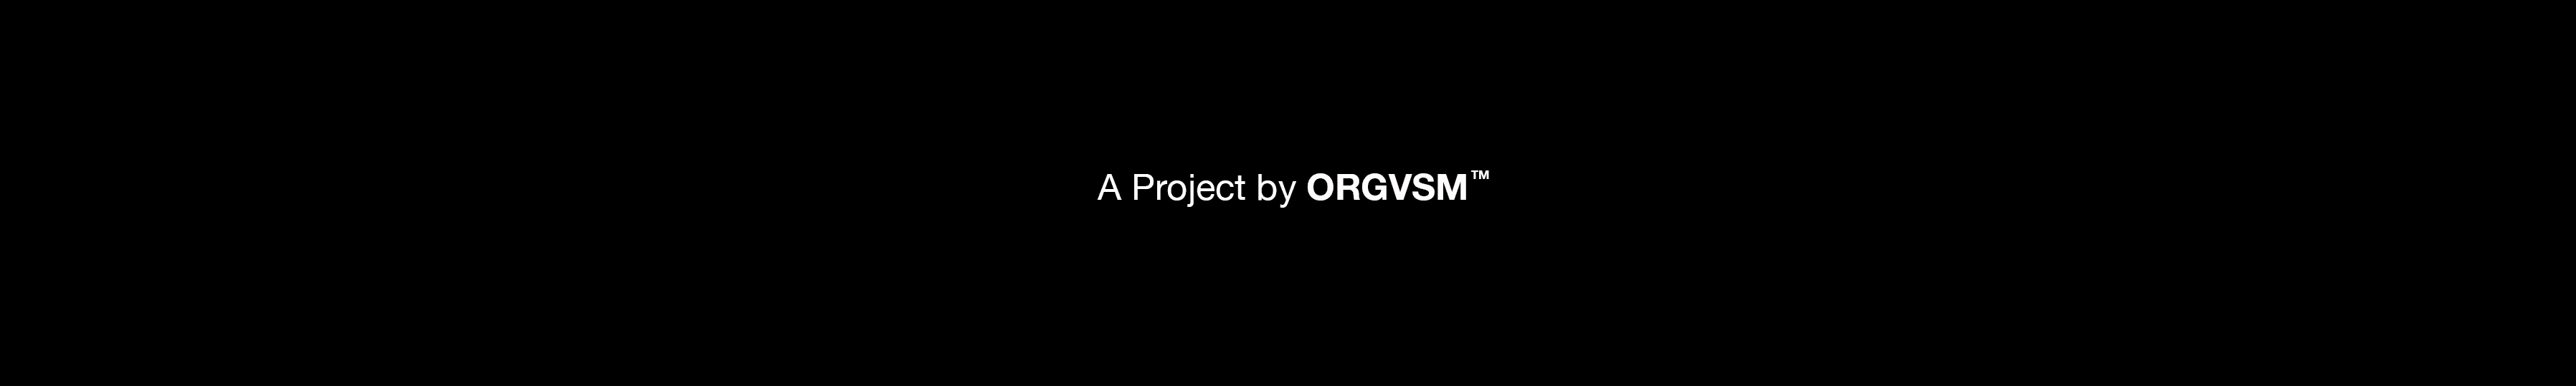 ORGVSM-Recovery-Mints banner